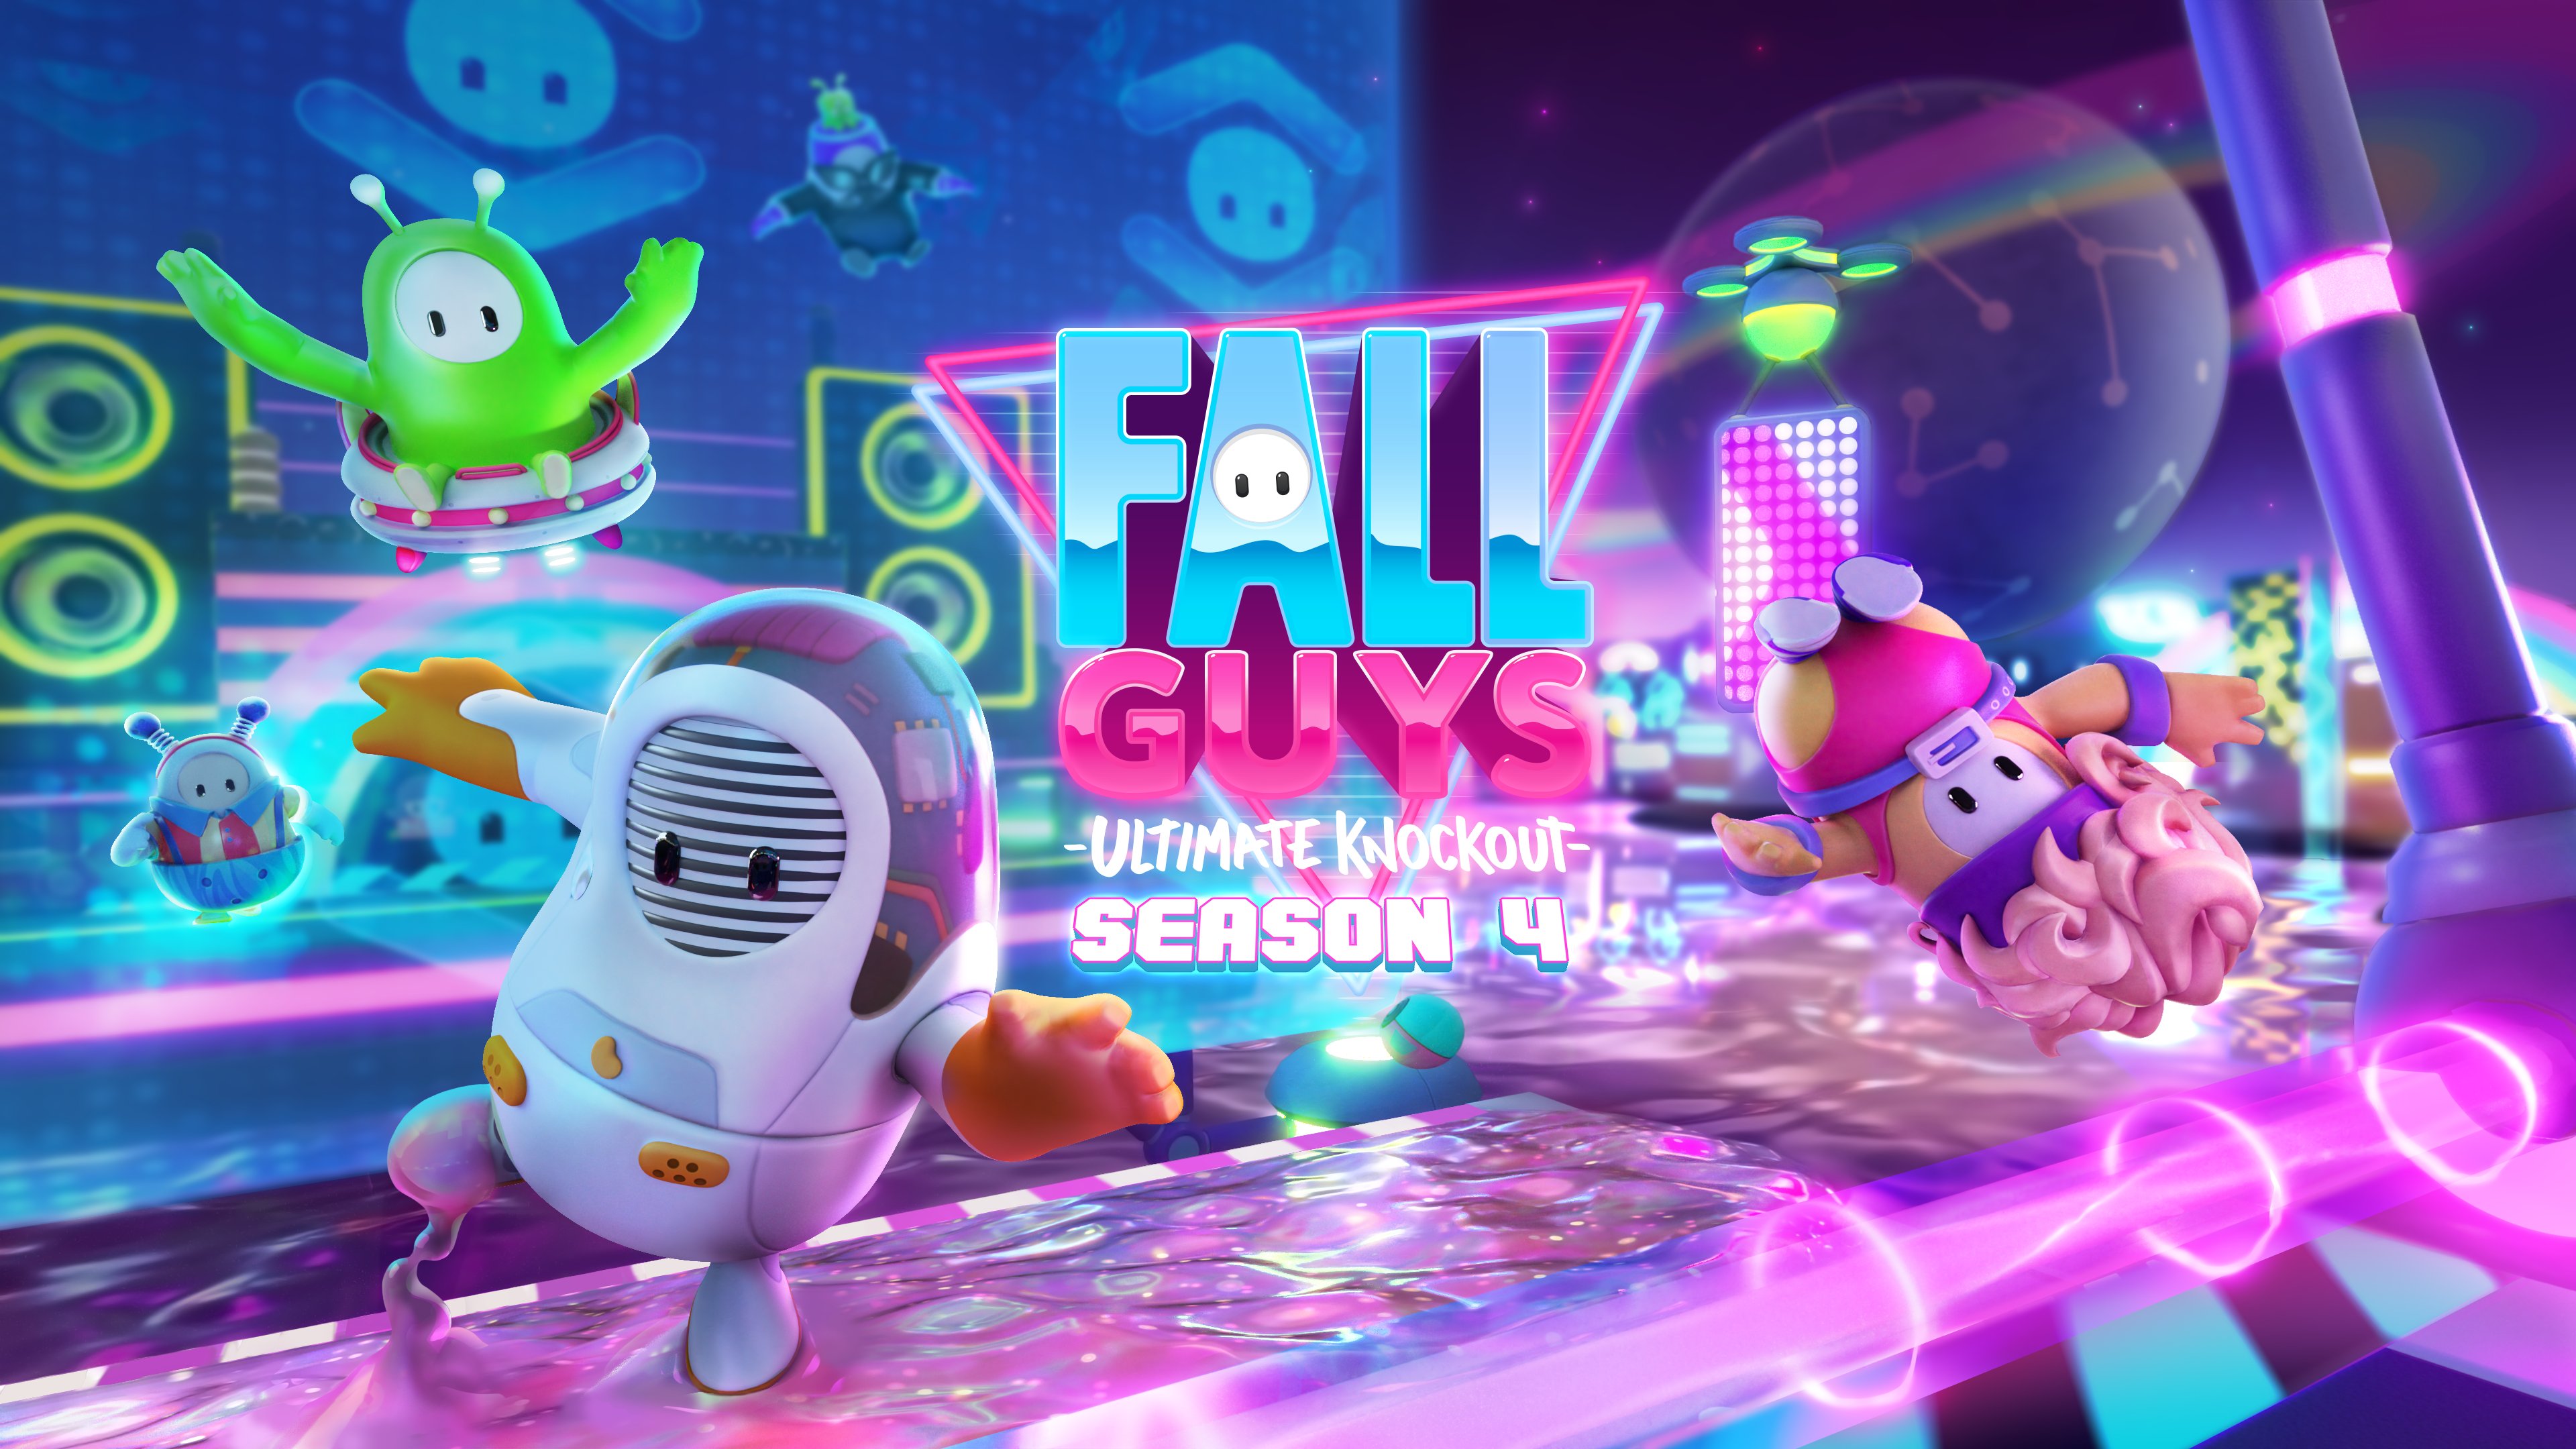 Fall Guys on X: 'tis the season of the Steam Awards! If Fall Guys